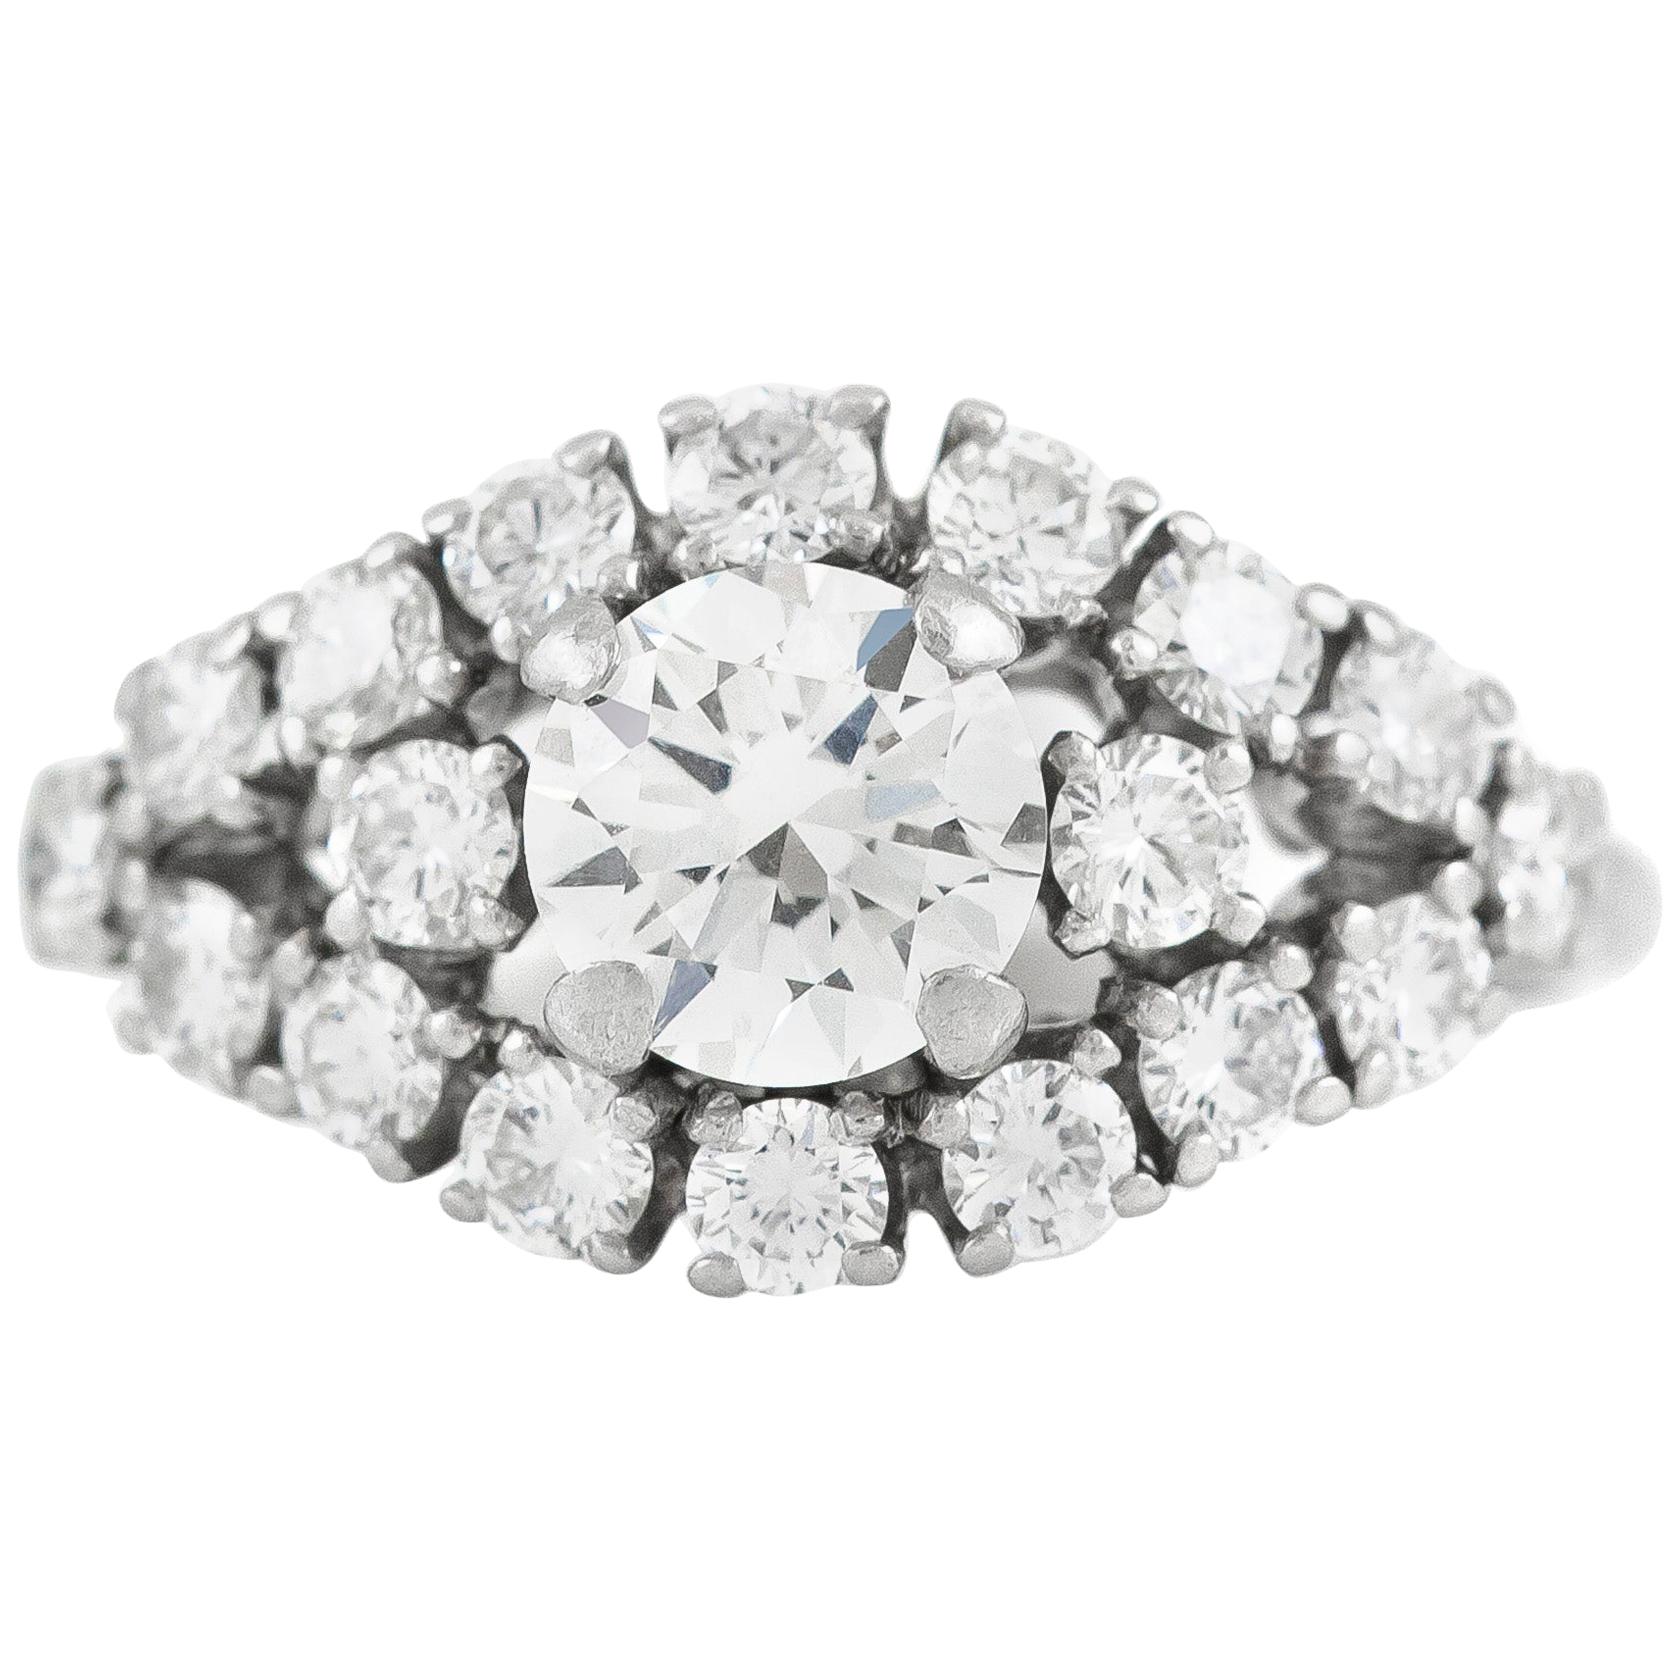 What is the best setting for a marquise-cut diamond?